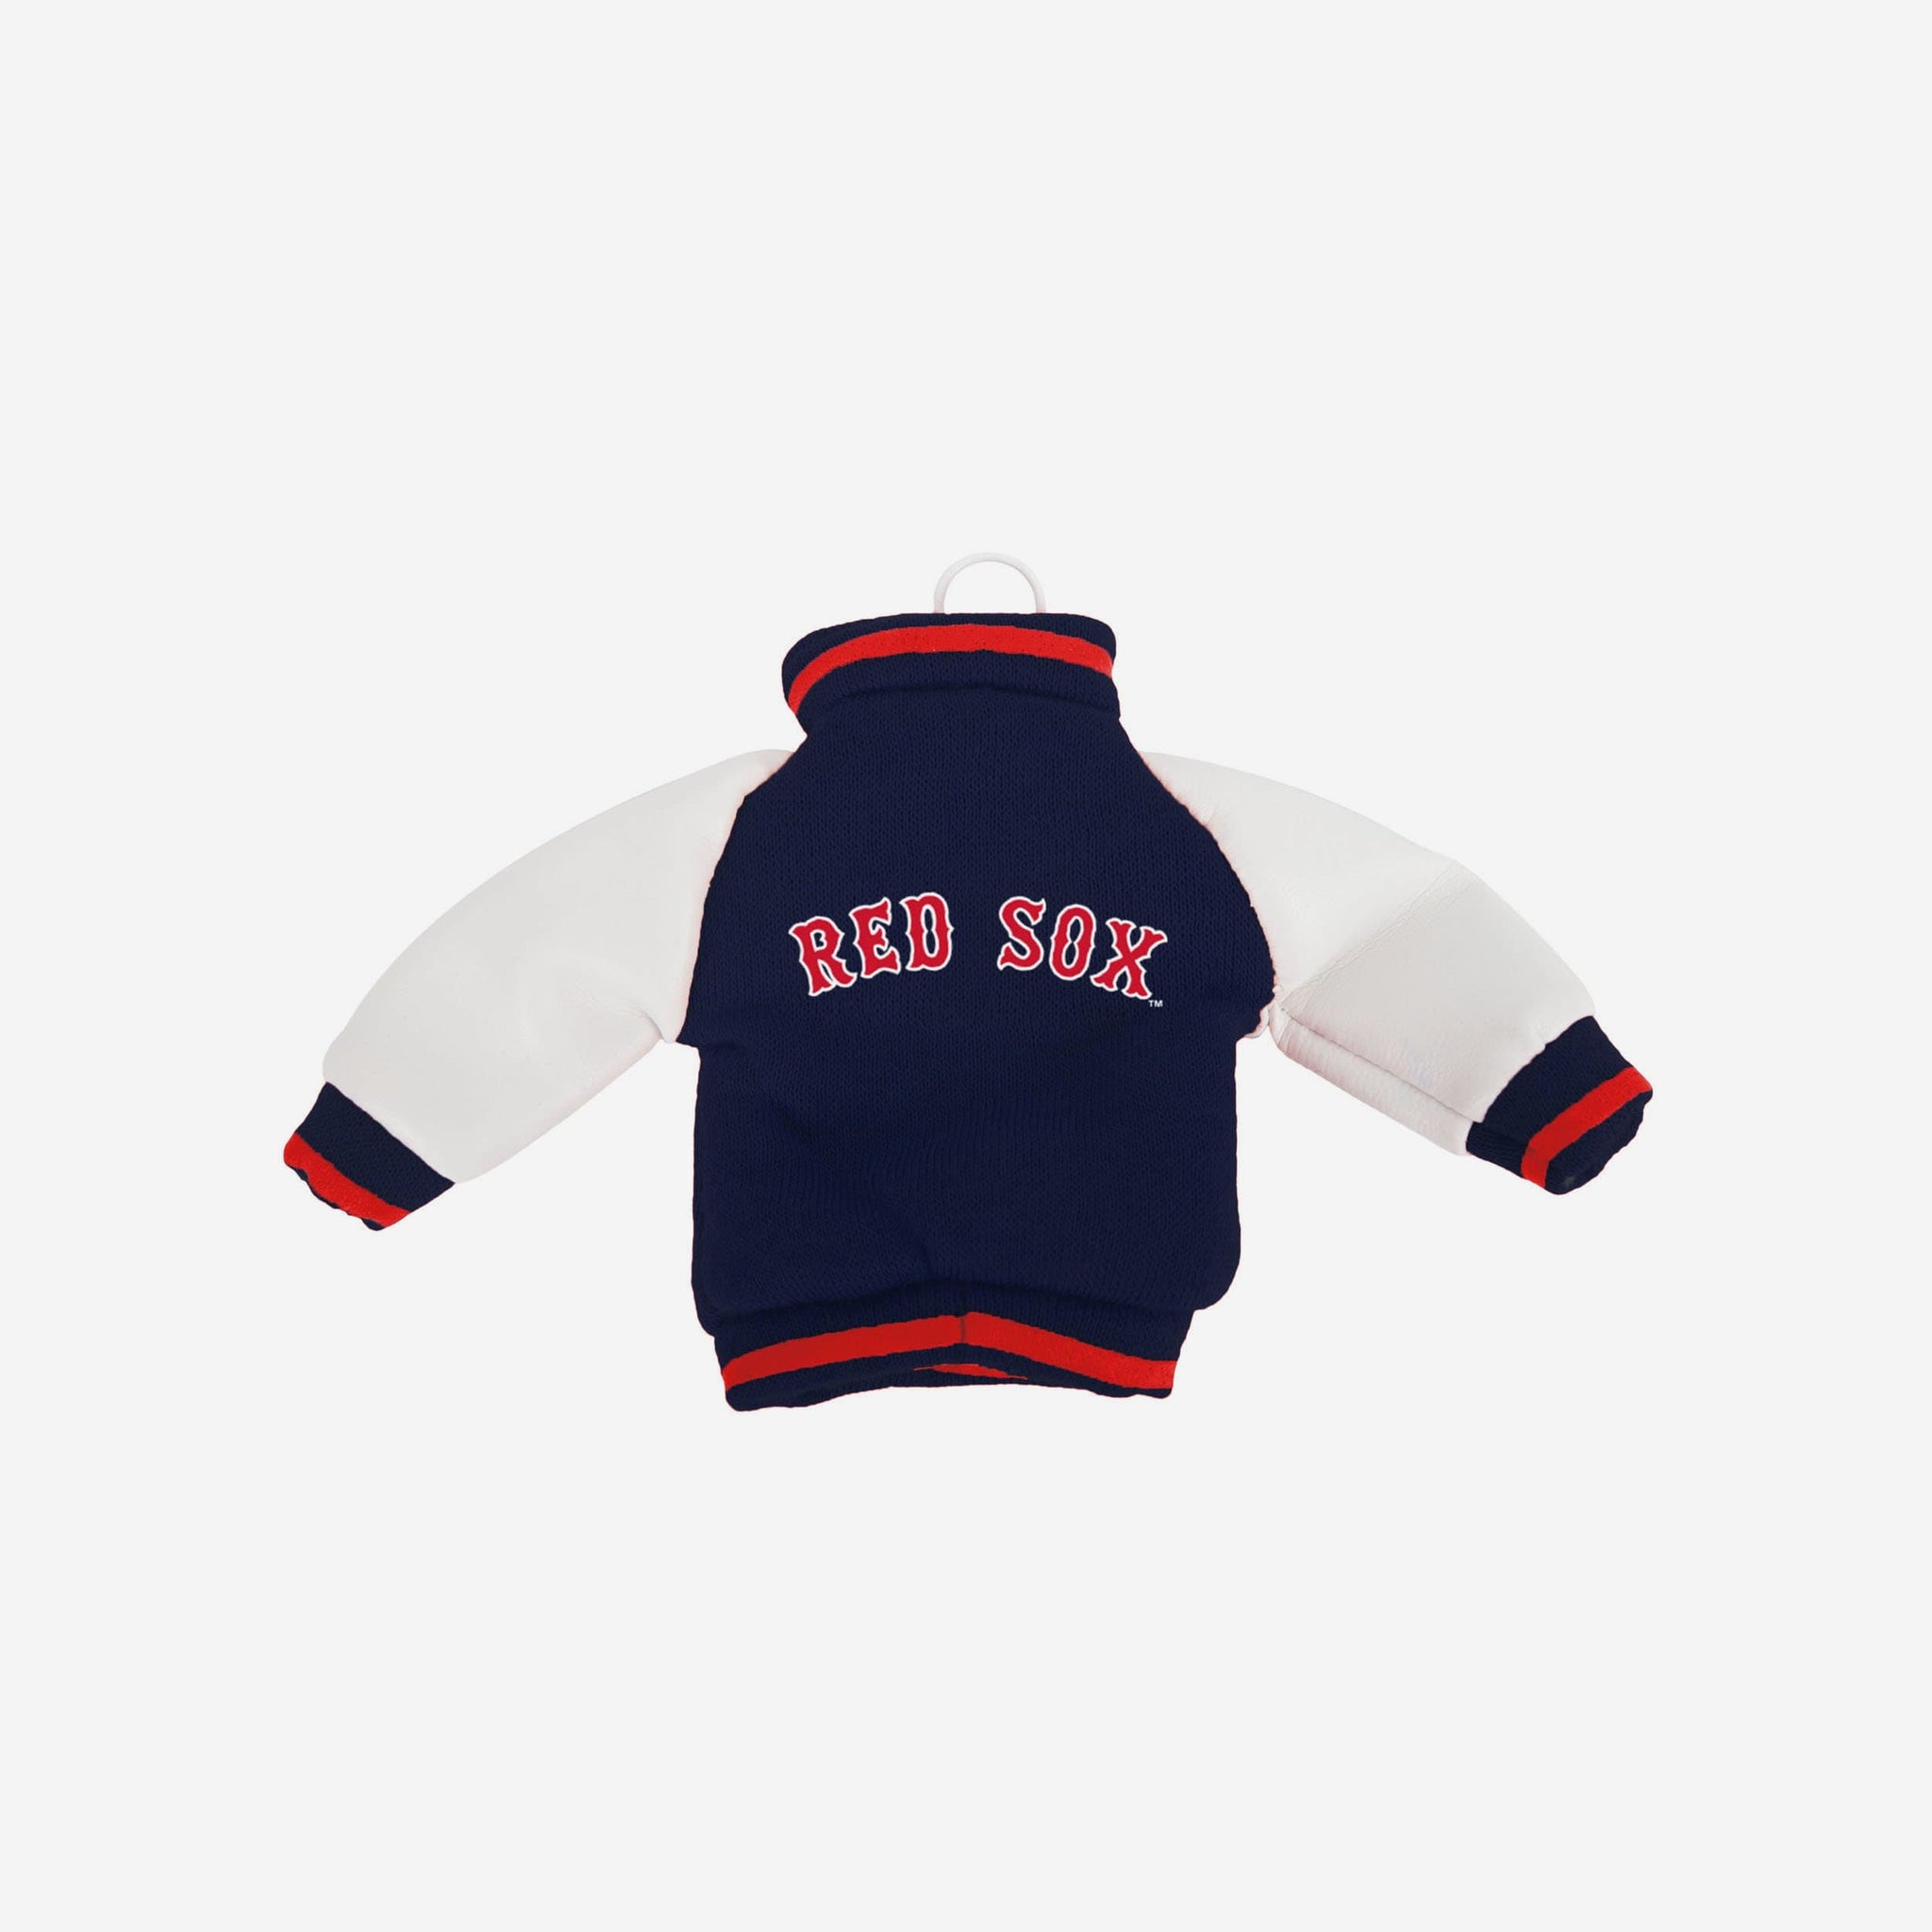 Boston Red Sox Apparel, Collectibles, and Fan Gear. FOCO